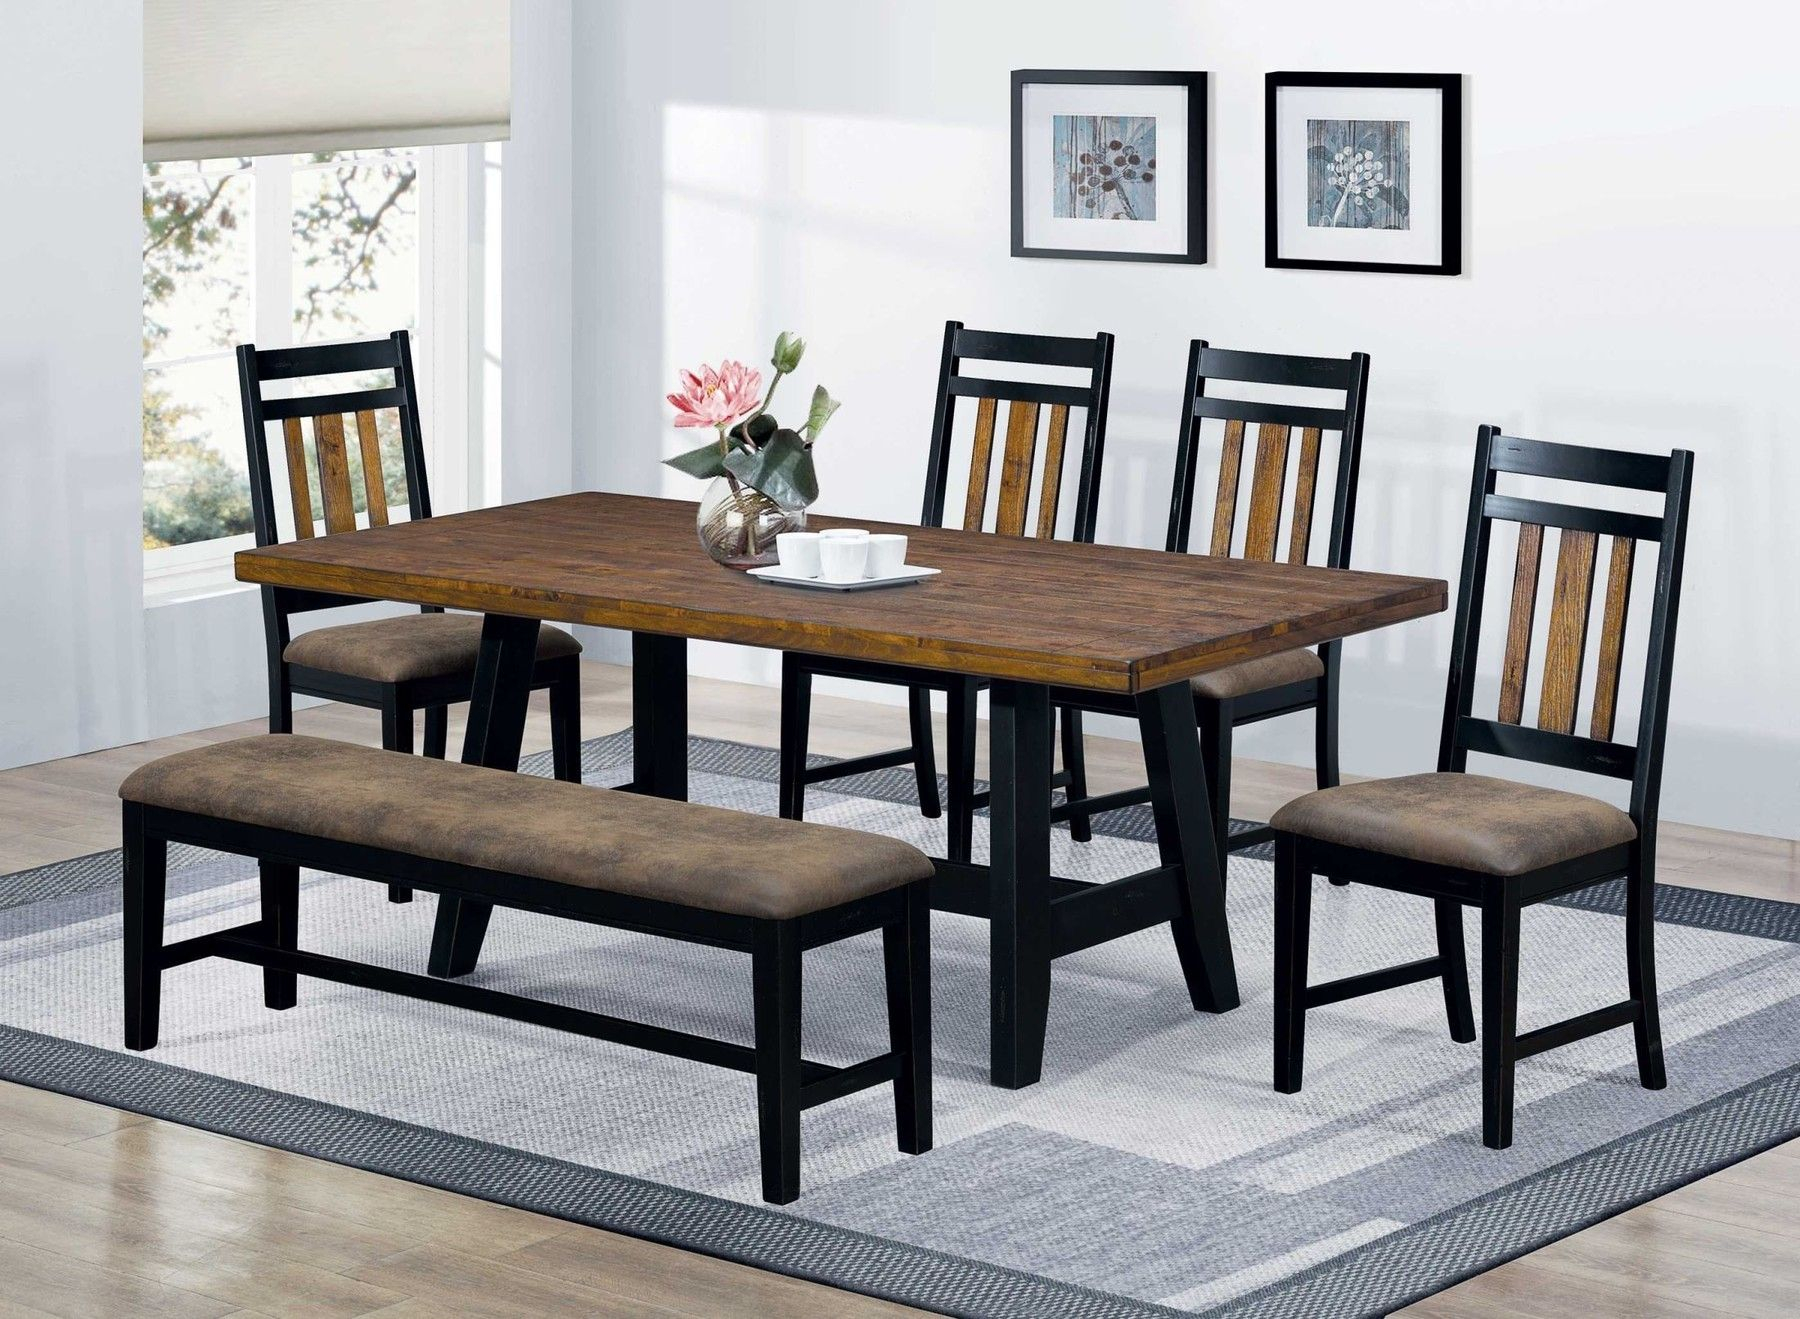 Pin Jennifer Toney On Office Build Rustic Dining Set in measurements 1800 X 1319